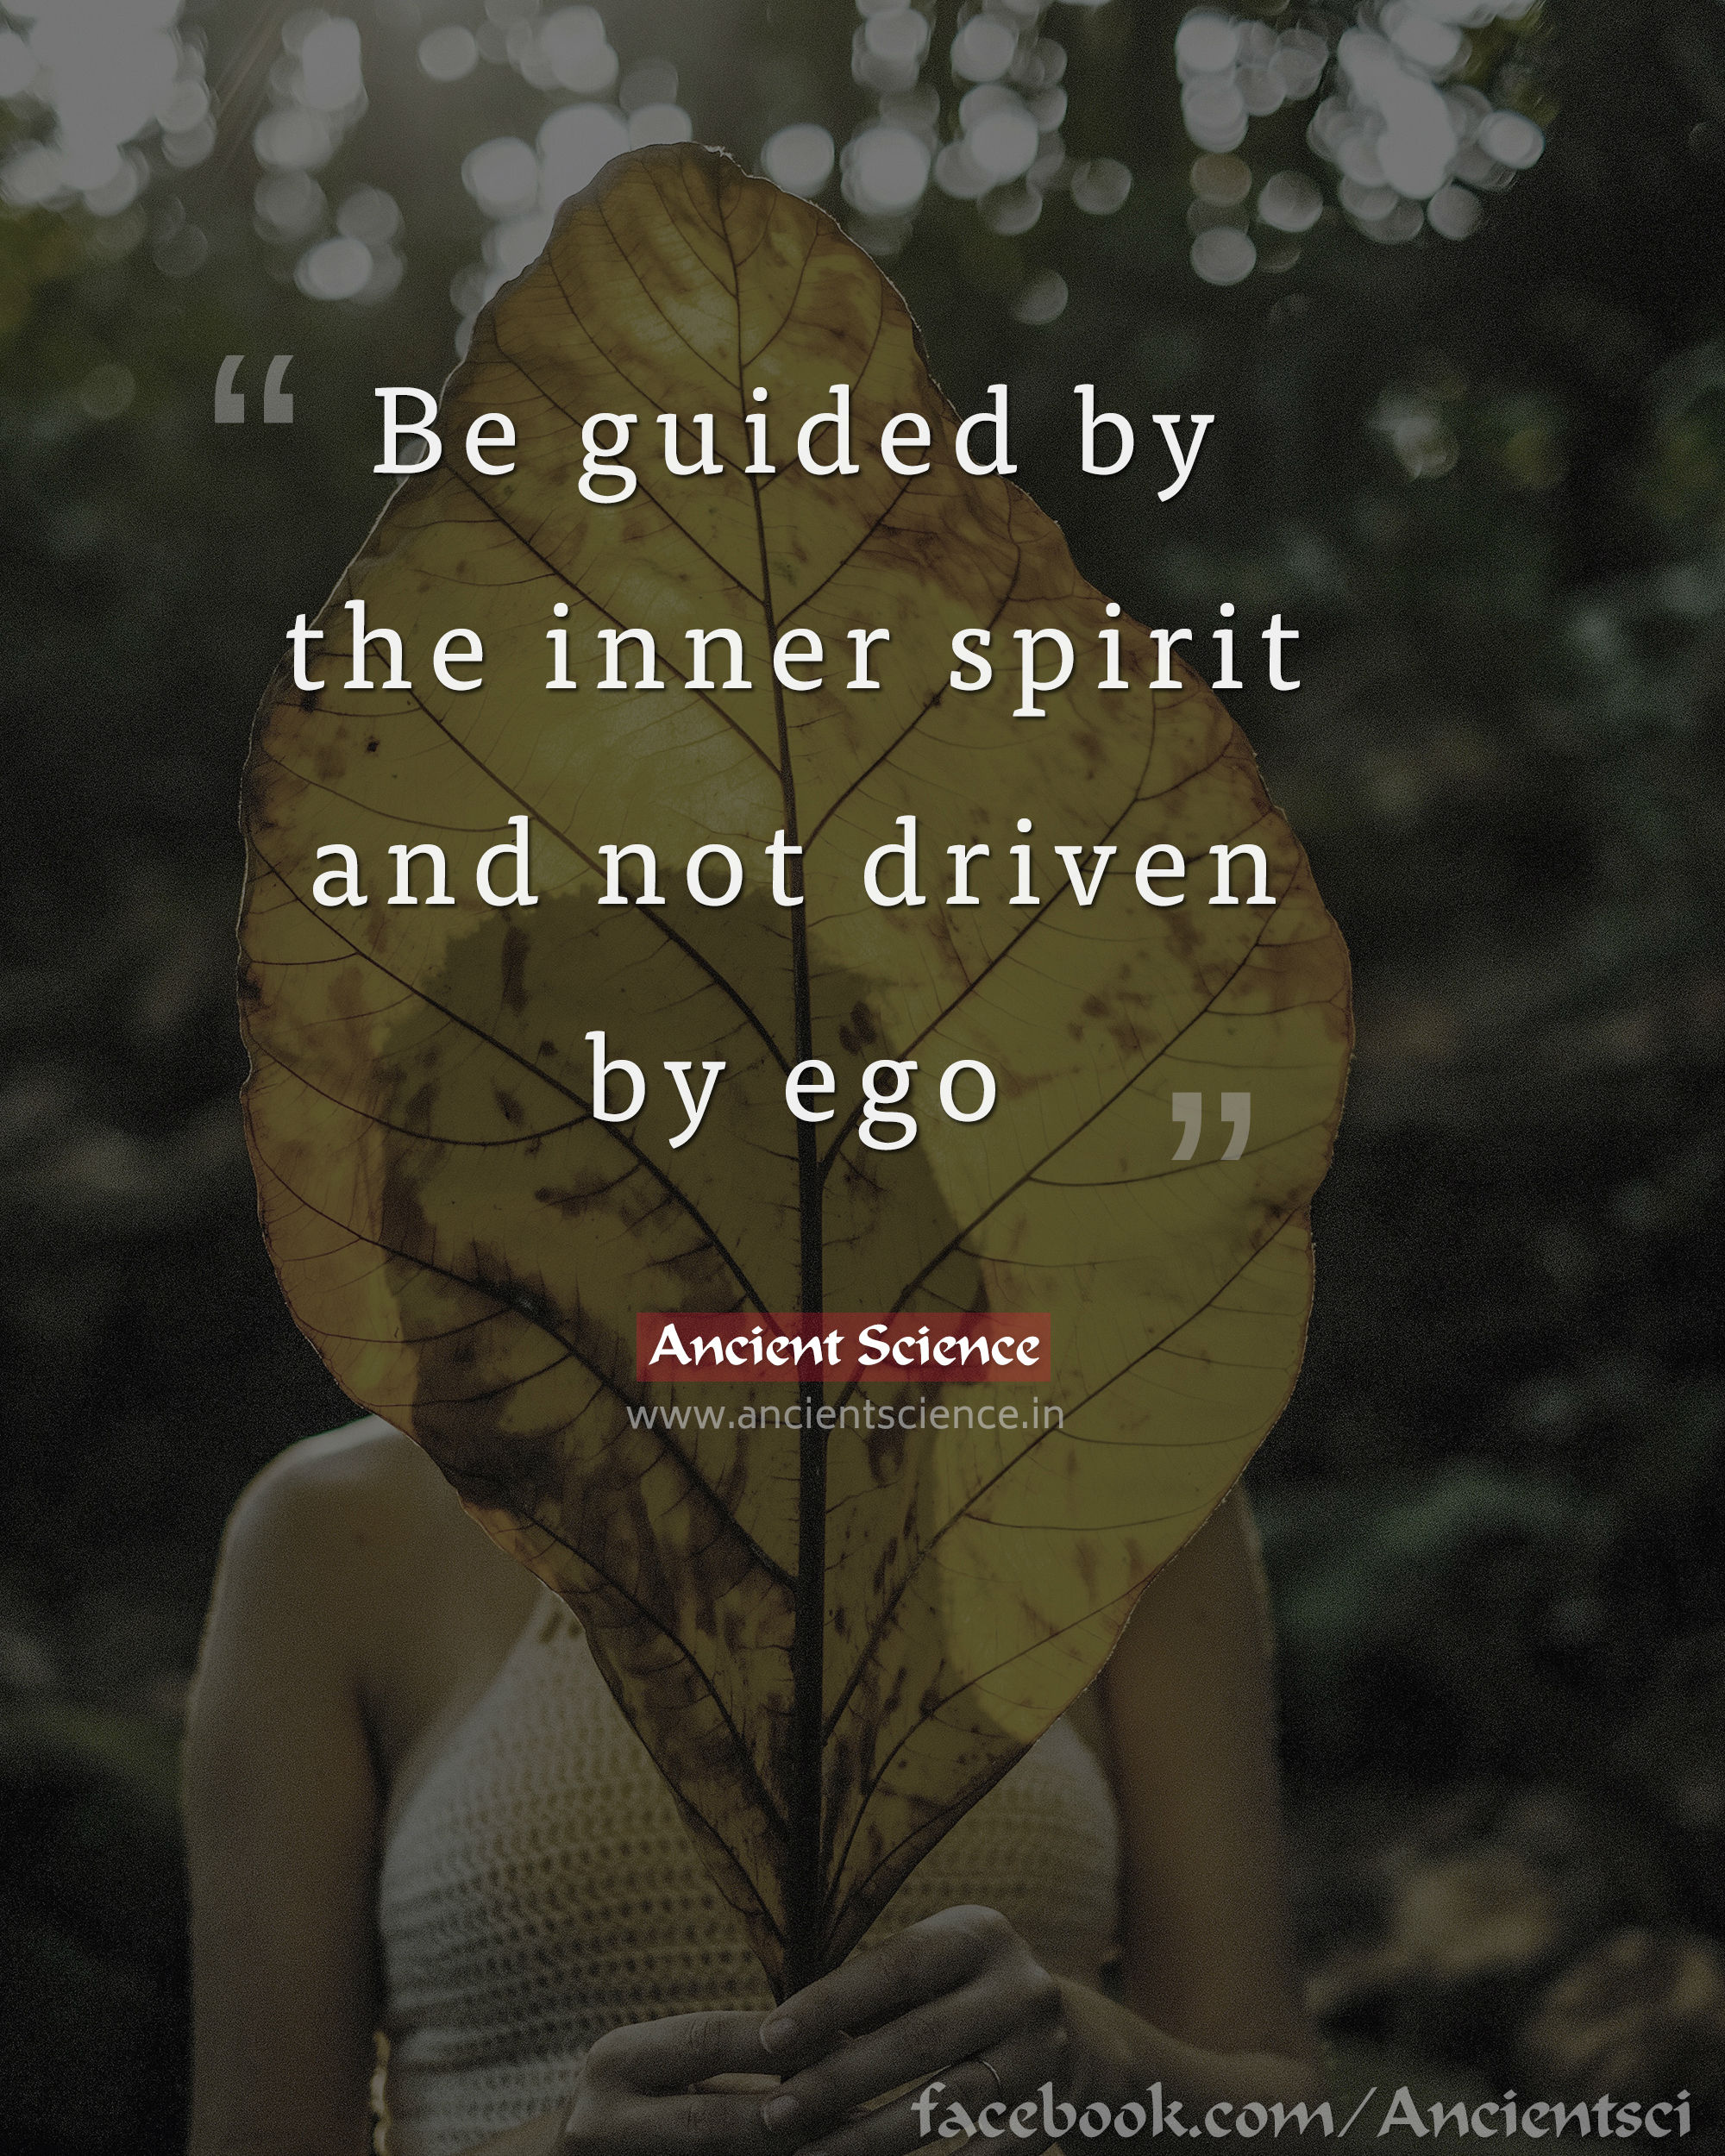 Be guided by the inner spirit and not driven by ego.